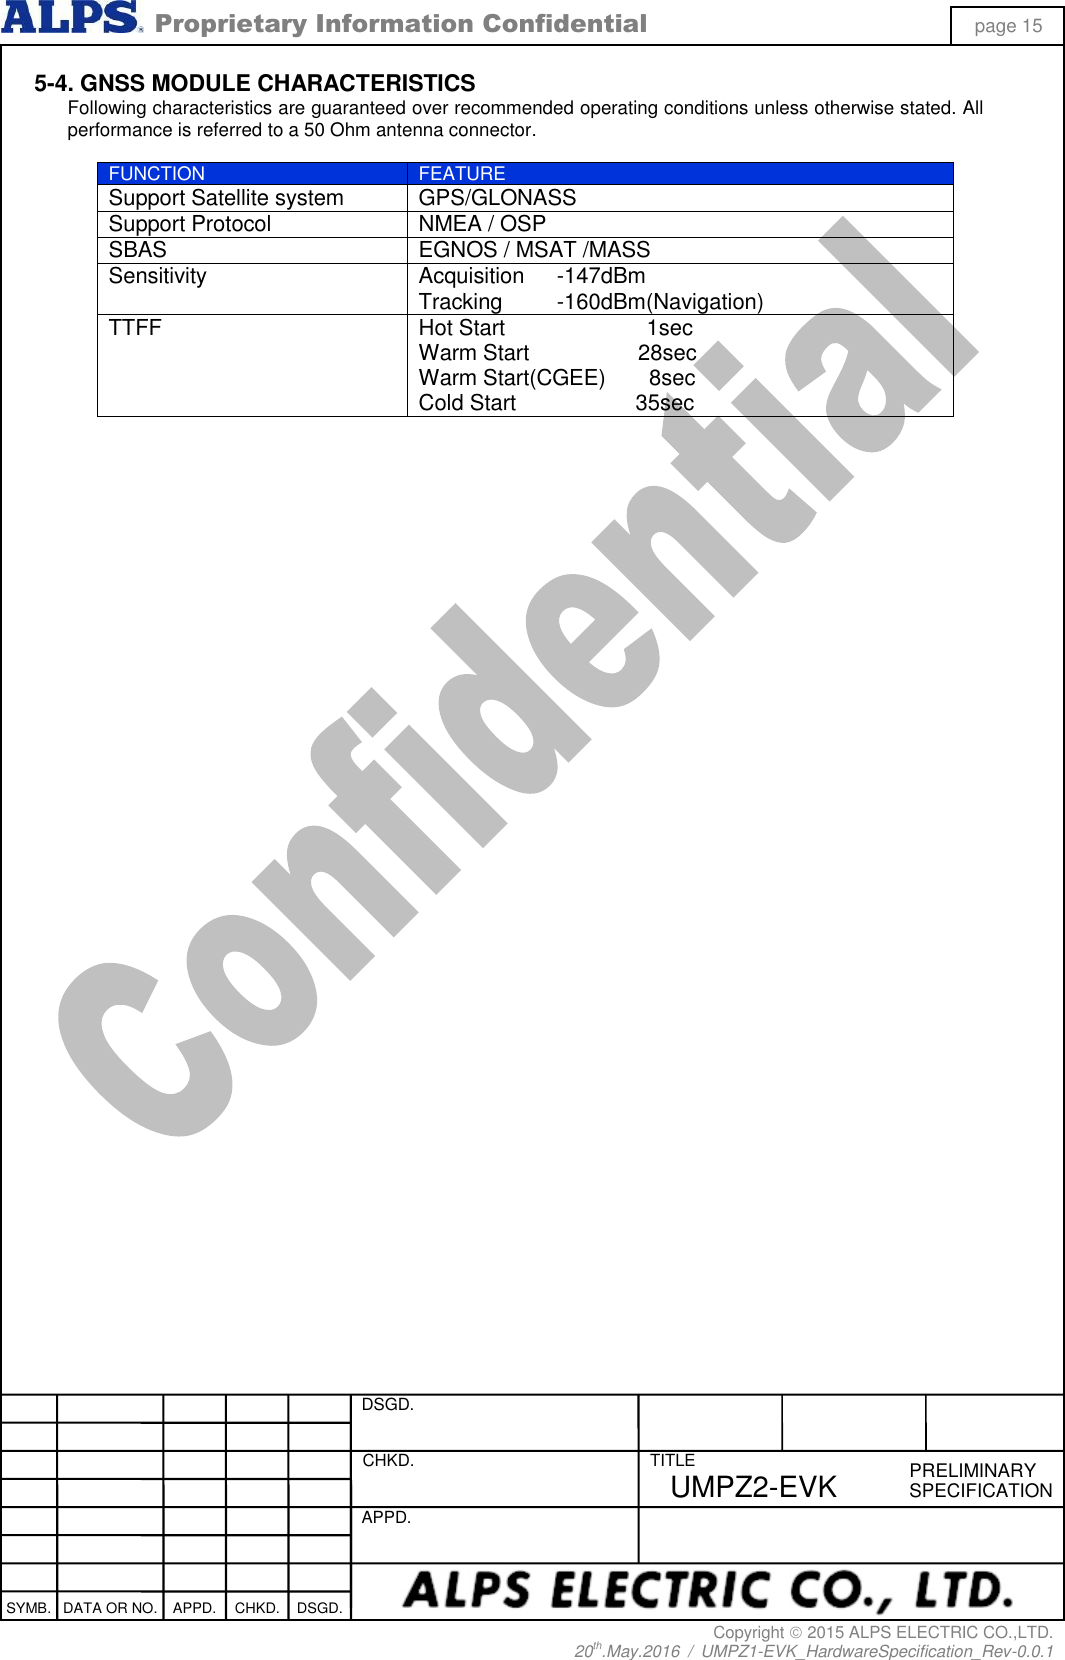  Proprietary Information Confidential page 15 Copyright  2015 ALPS ELECTRIC CO.,LTD. 20th.May.2016  /  UMPZ1-EVK_HardwareSpecification_Rev-0.0.1   DSGD.  CHKD.   APPD.  TITLE PRELIMINARY SPECIFICATION SYMB. DATA OR NO. APPD. CHKD. DSGD. UMPZ2-EVK 5-4. GNSS MODULE CHARACTERISTICS Following characteristics are guaranteed over recommended operating conditions unless otherwise stated. All performance is referred to a 50 Ohm antenna connector.  FUNCTION FEATURE Support Satellite system GPS/GLONASS Support Protocol NMEA / OSP SBAS EGNOS / MSAT /MASS Sensitivity Acquisition   -147dBm Tracking          -160dBm(Navigation) TTFF Hot Start                          1sec Warm Start                    28sec Warm Start(CGEE)        8sec Cold Start                      35sec   